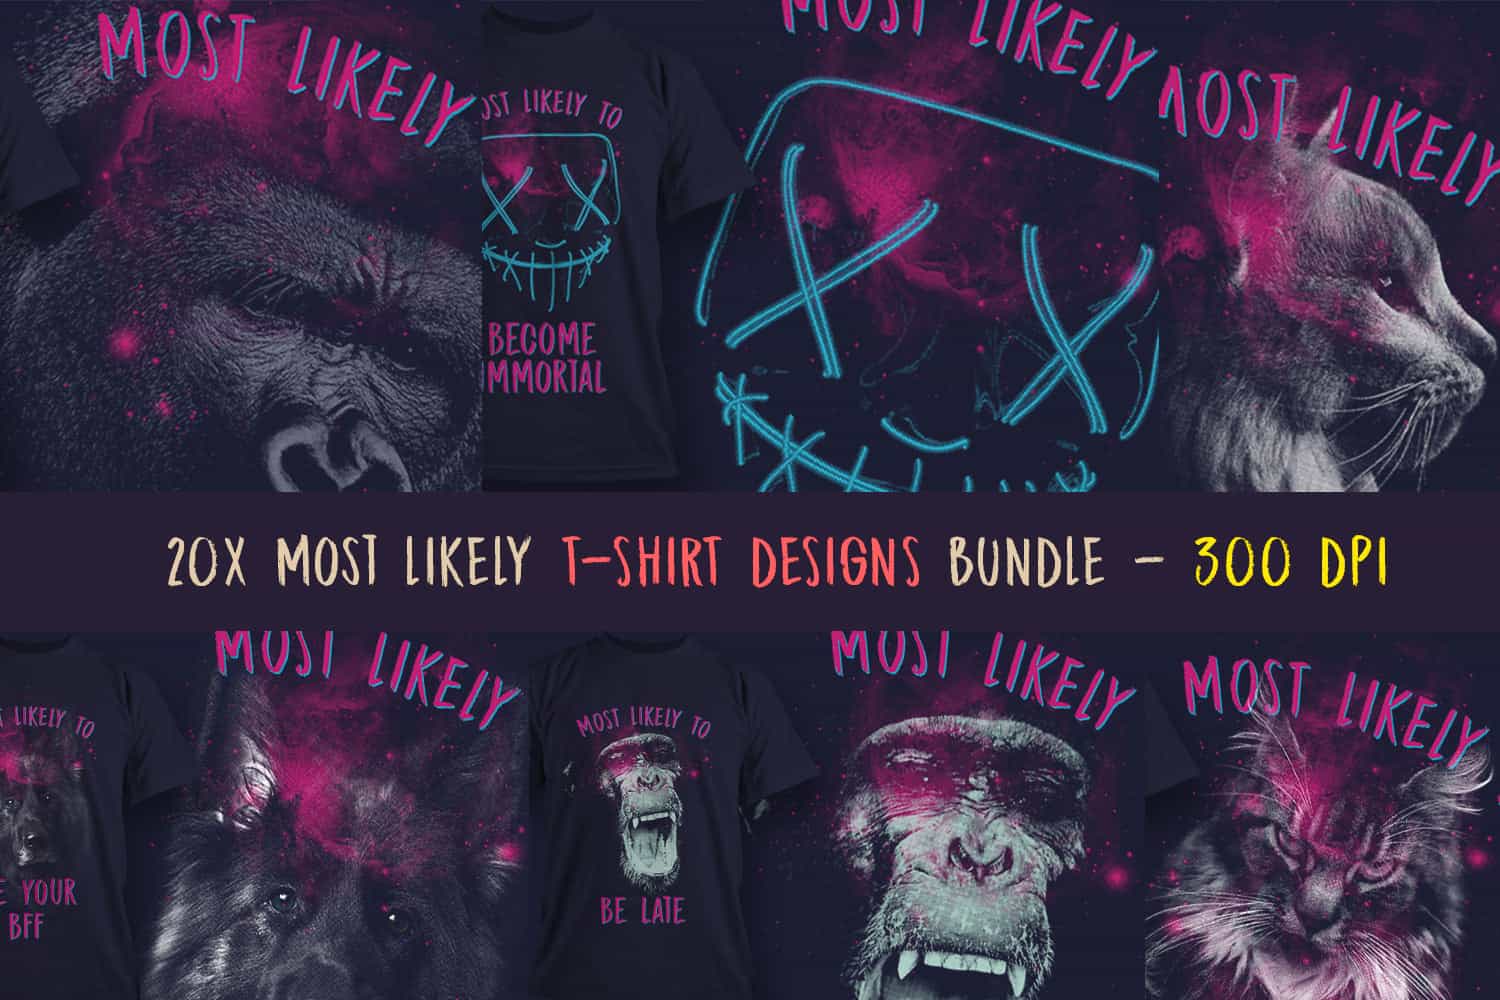 20x Most likely T-shirt designs bundle